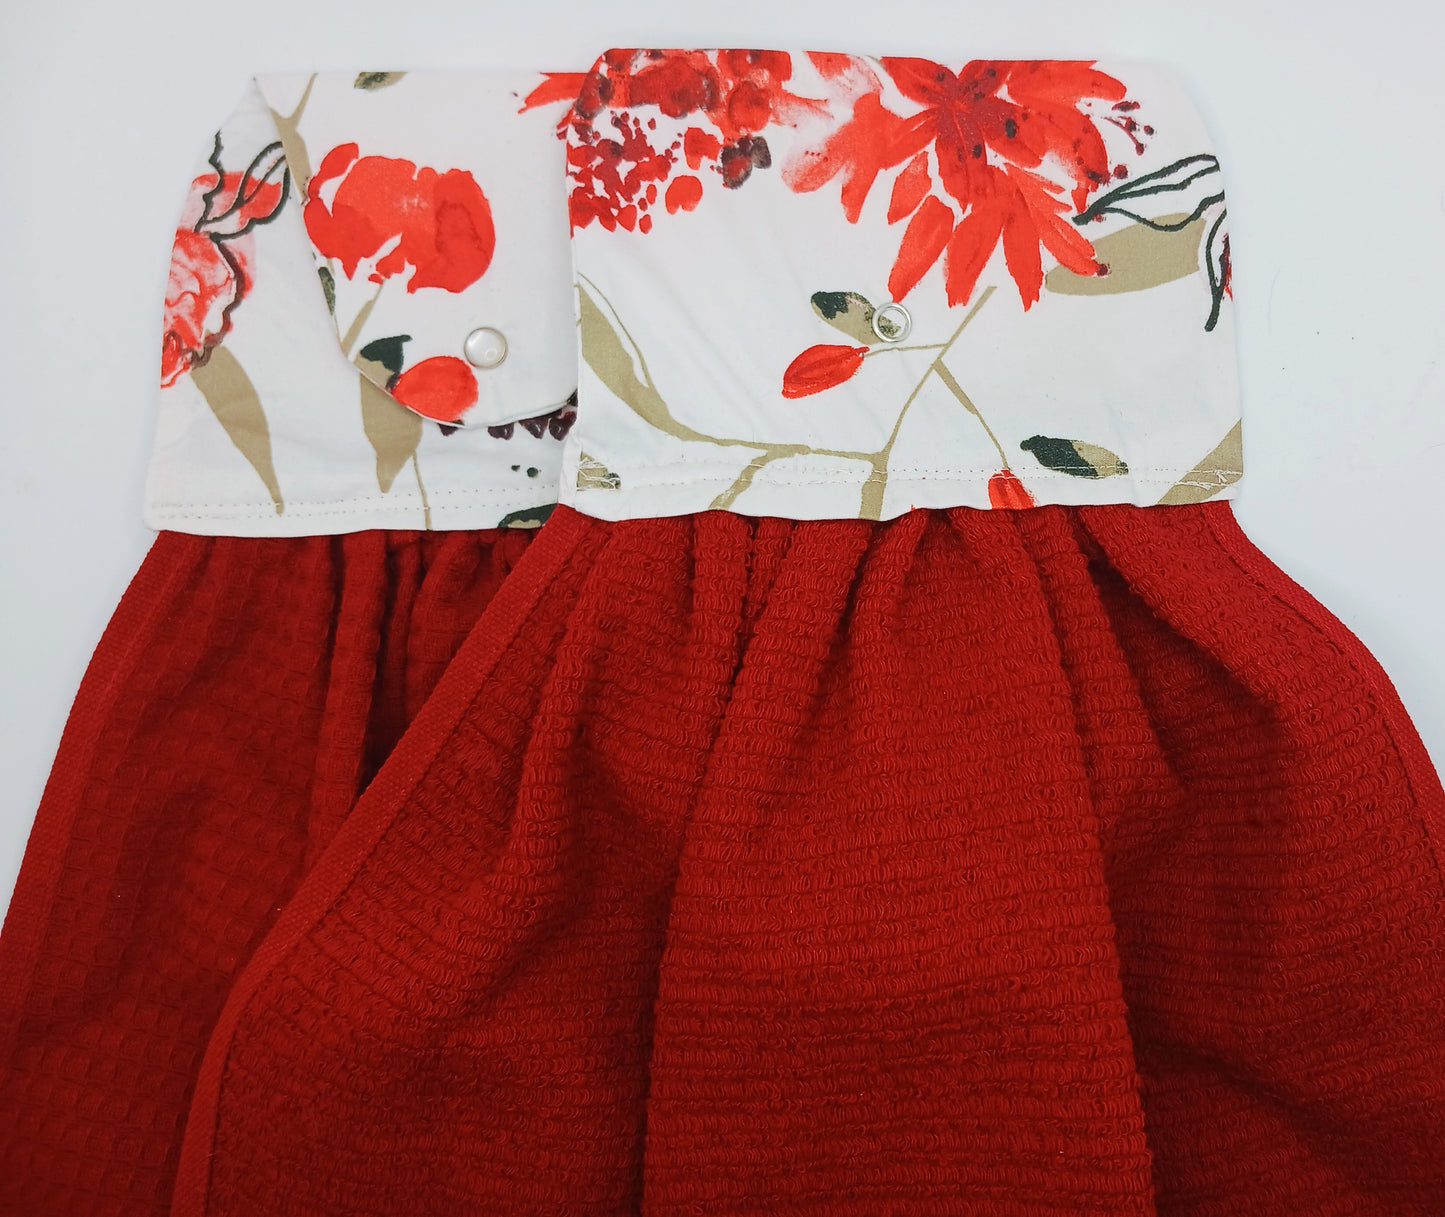 Red Flowered Hanging Towel (Set of Two)